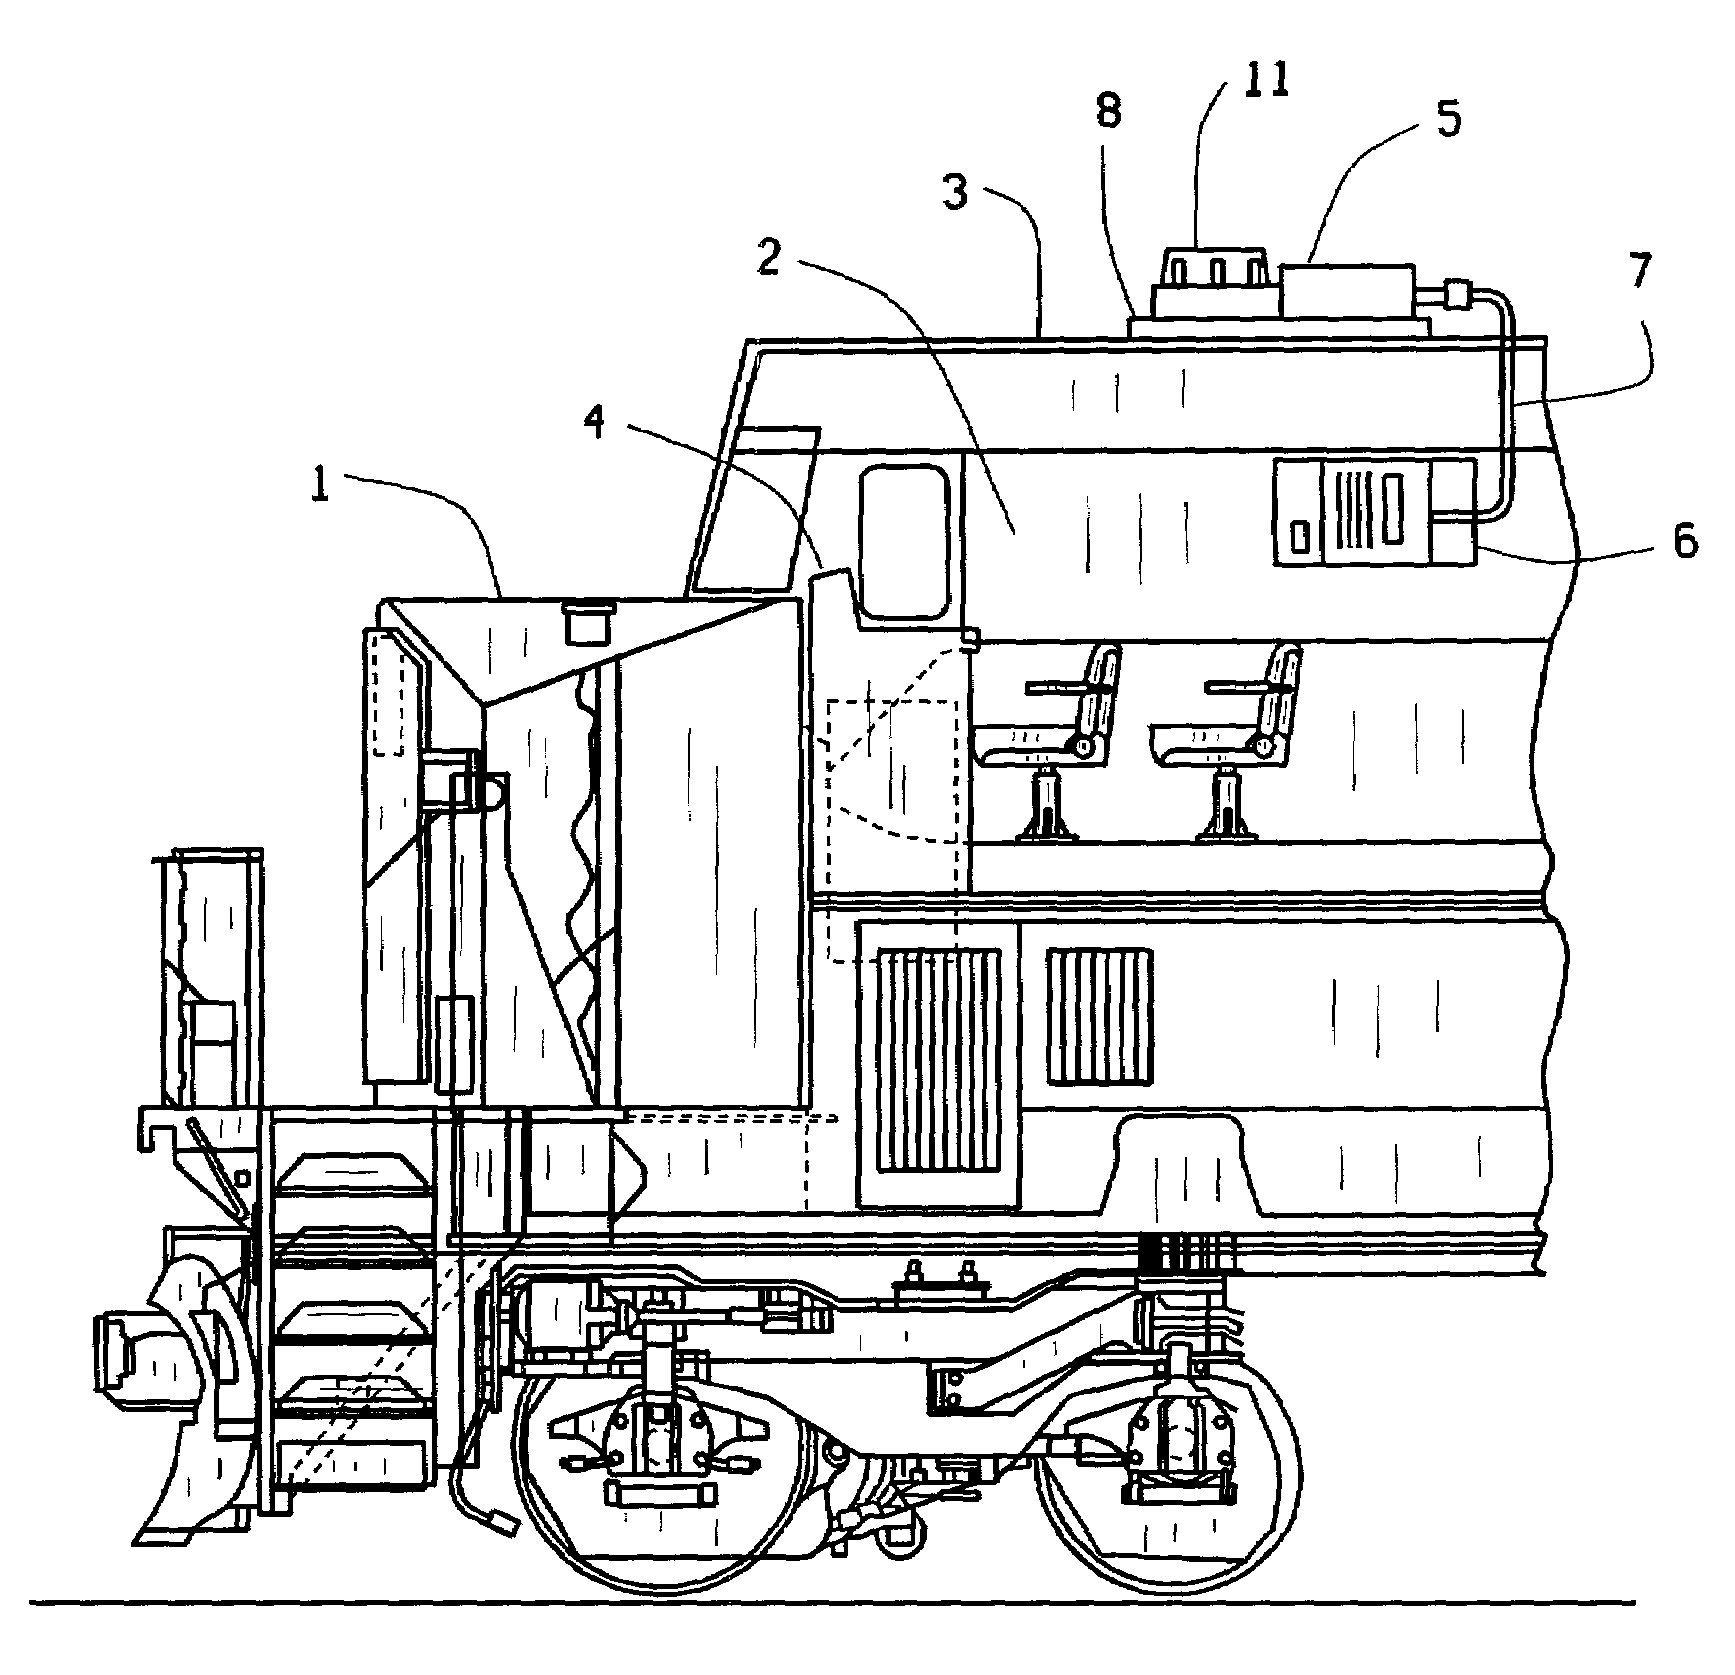 Method and apparatus for locomotive radio communications, with expansion capability